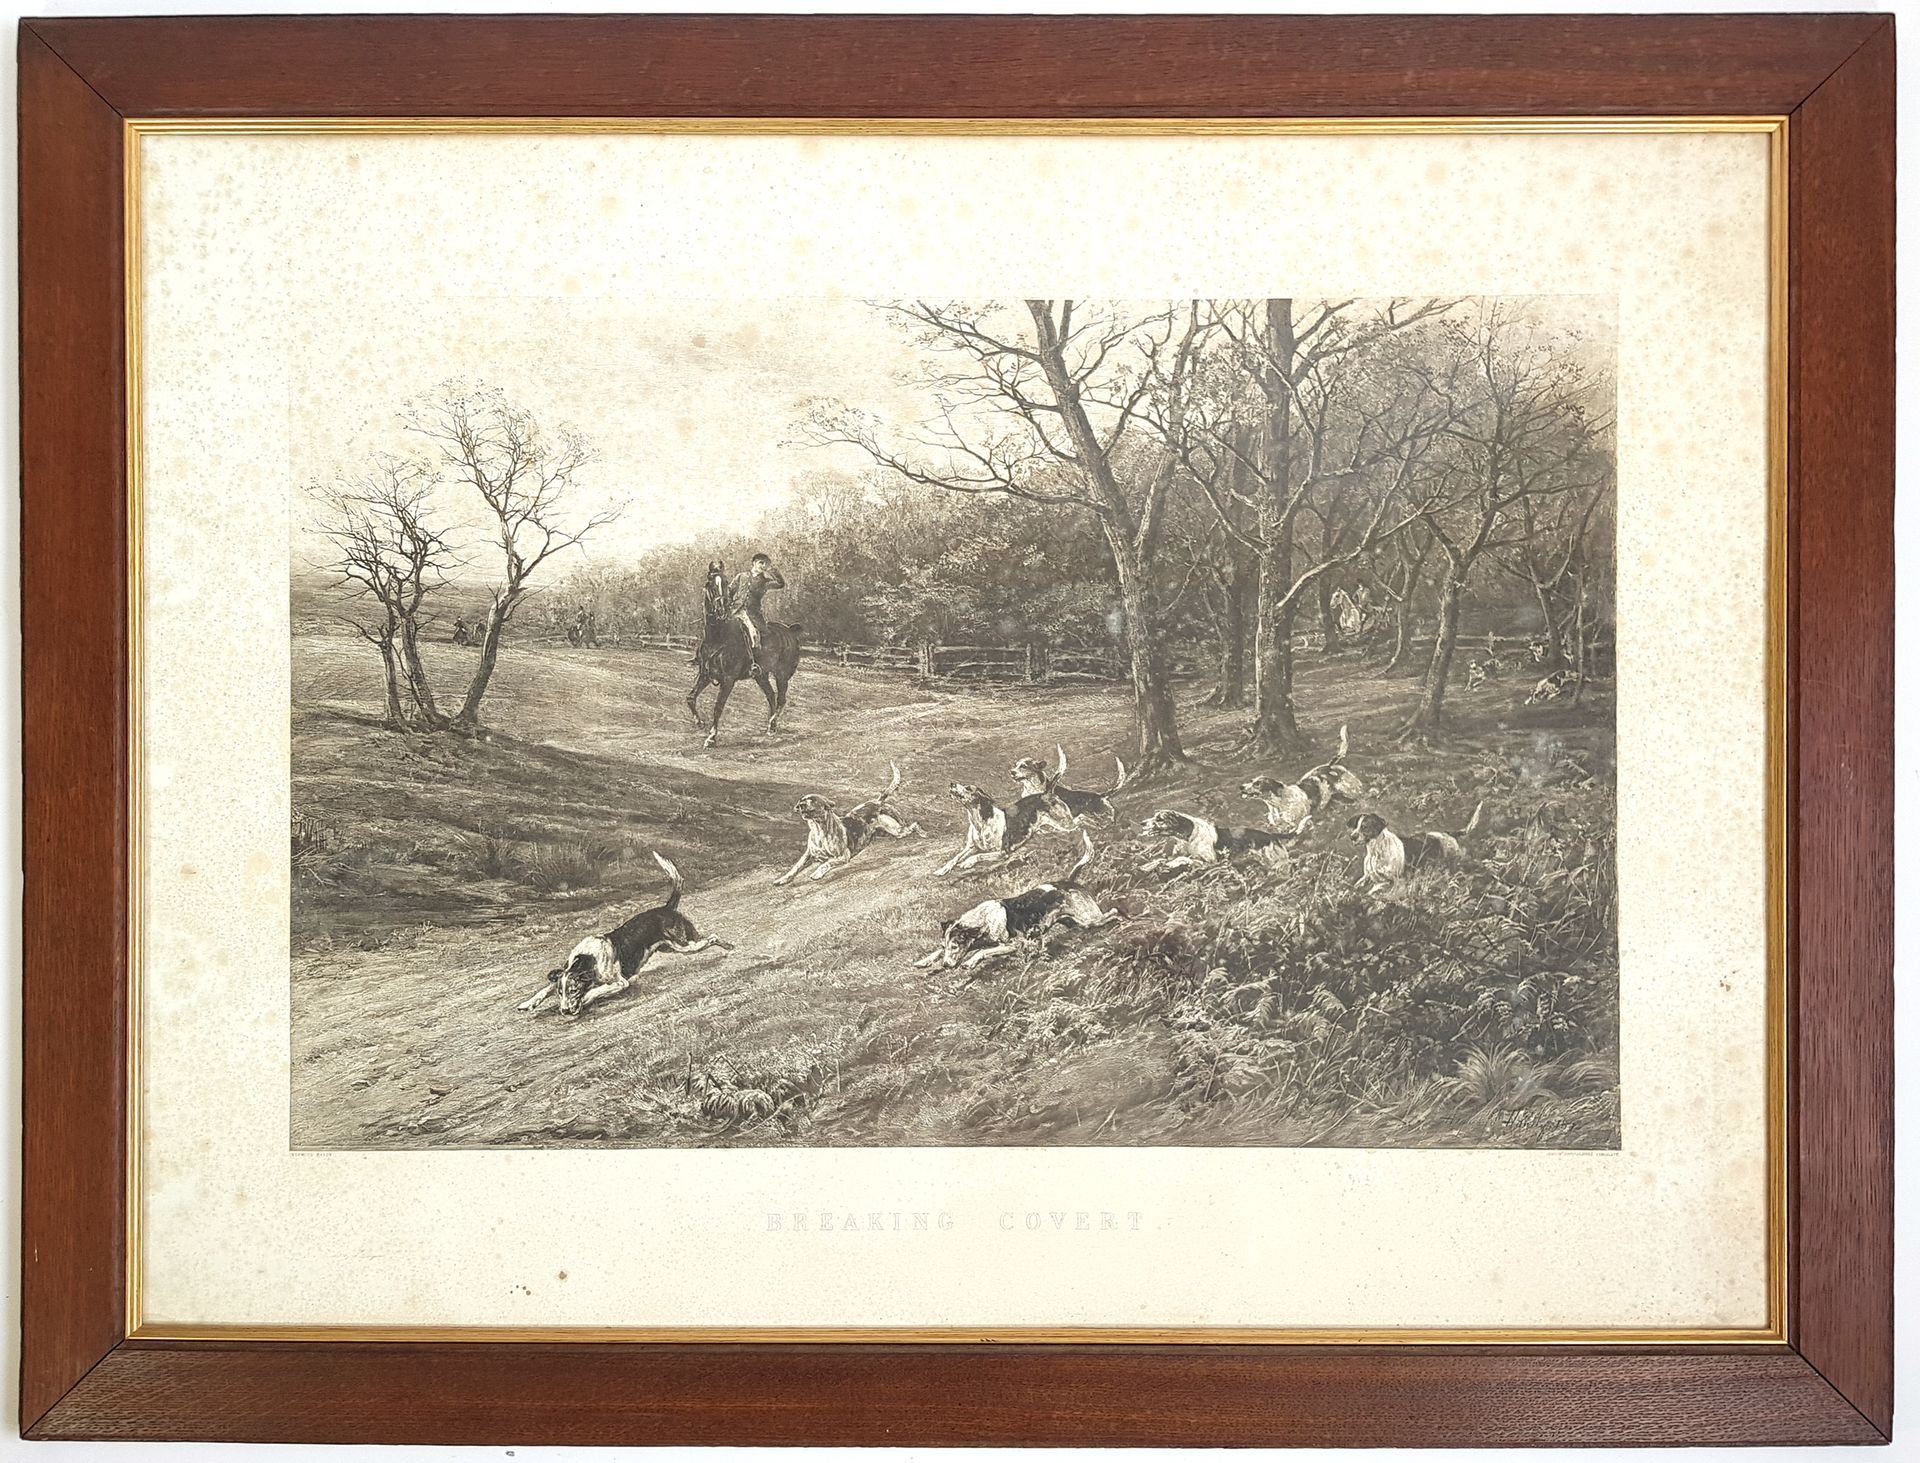 Null Chasse à courre

D'après Heywood HARDY (1842-1933)

Breaking covert

Photog&hellip;